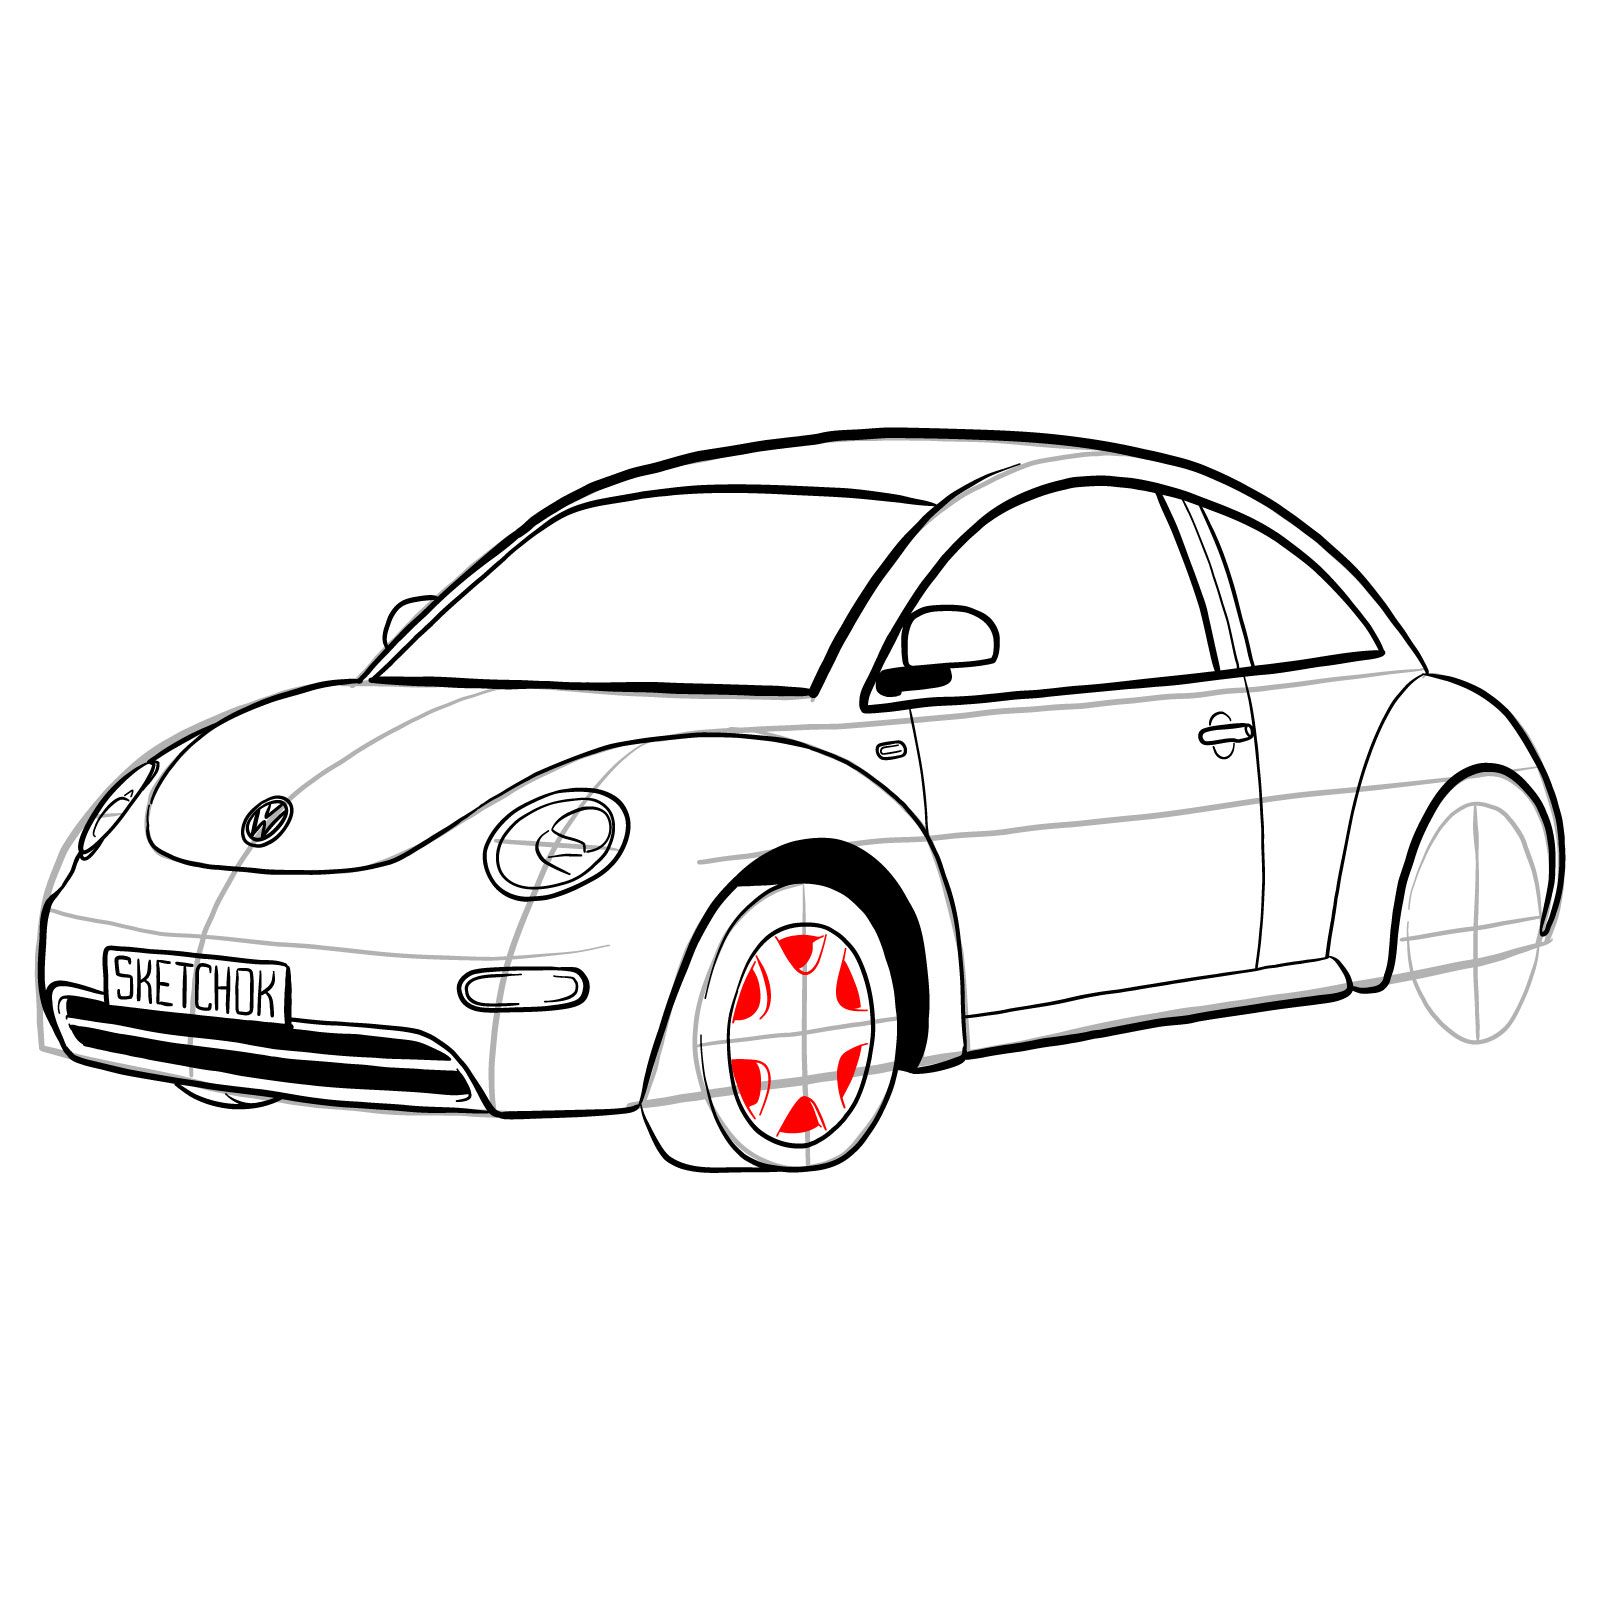 How to draw Volkswagen New Beetle - Sketchok easy drawing guides